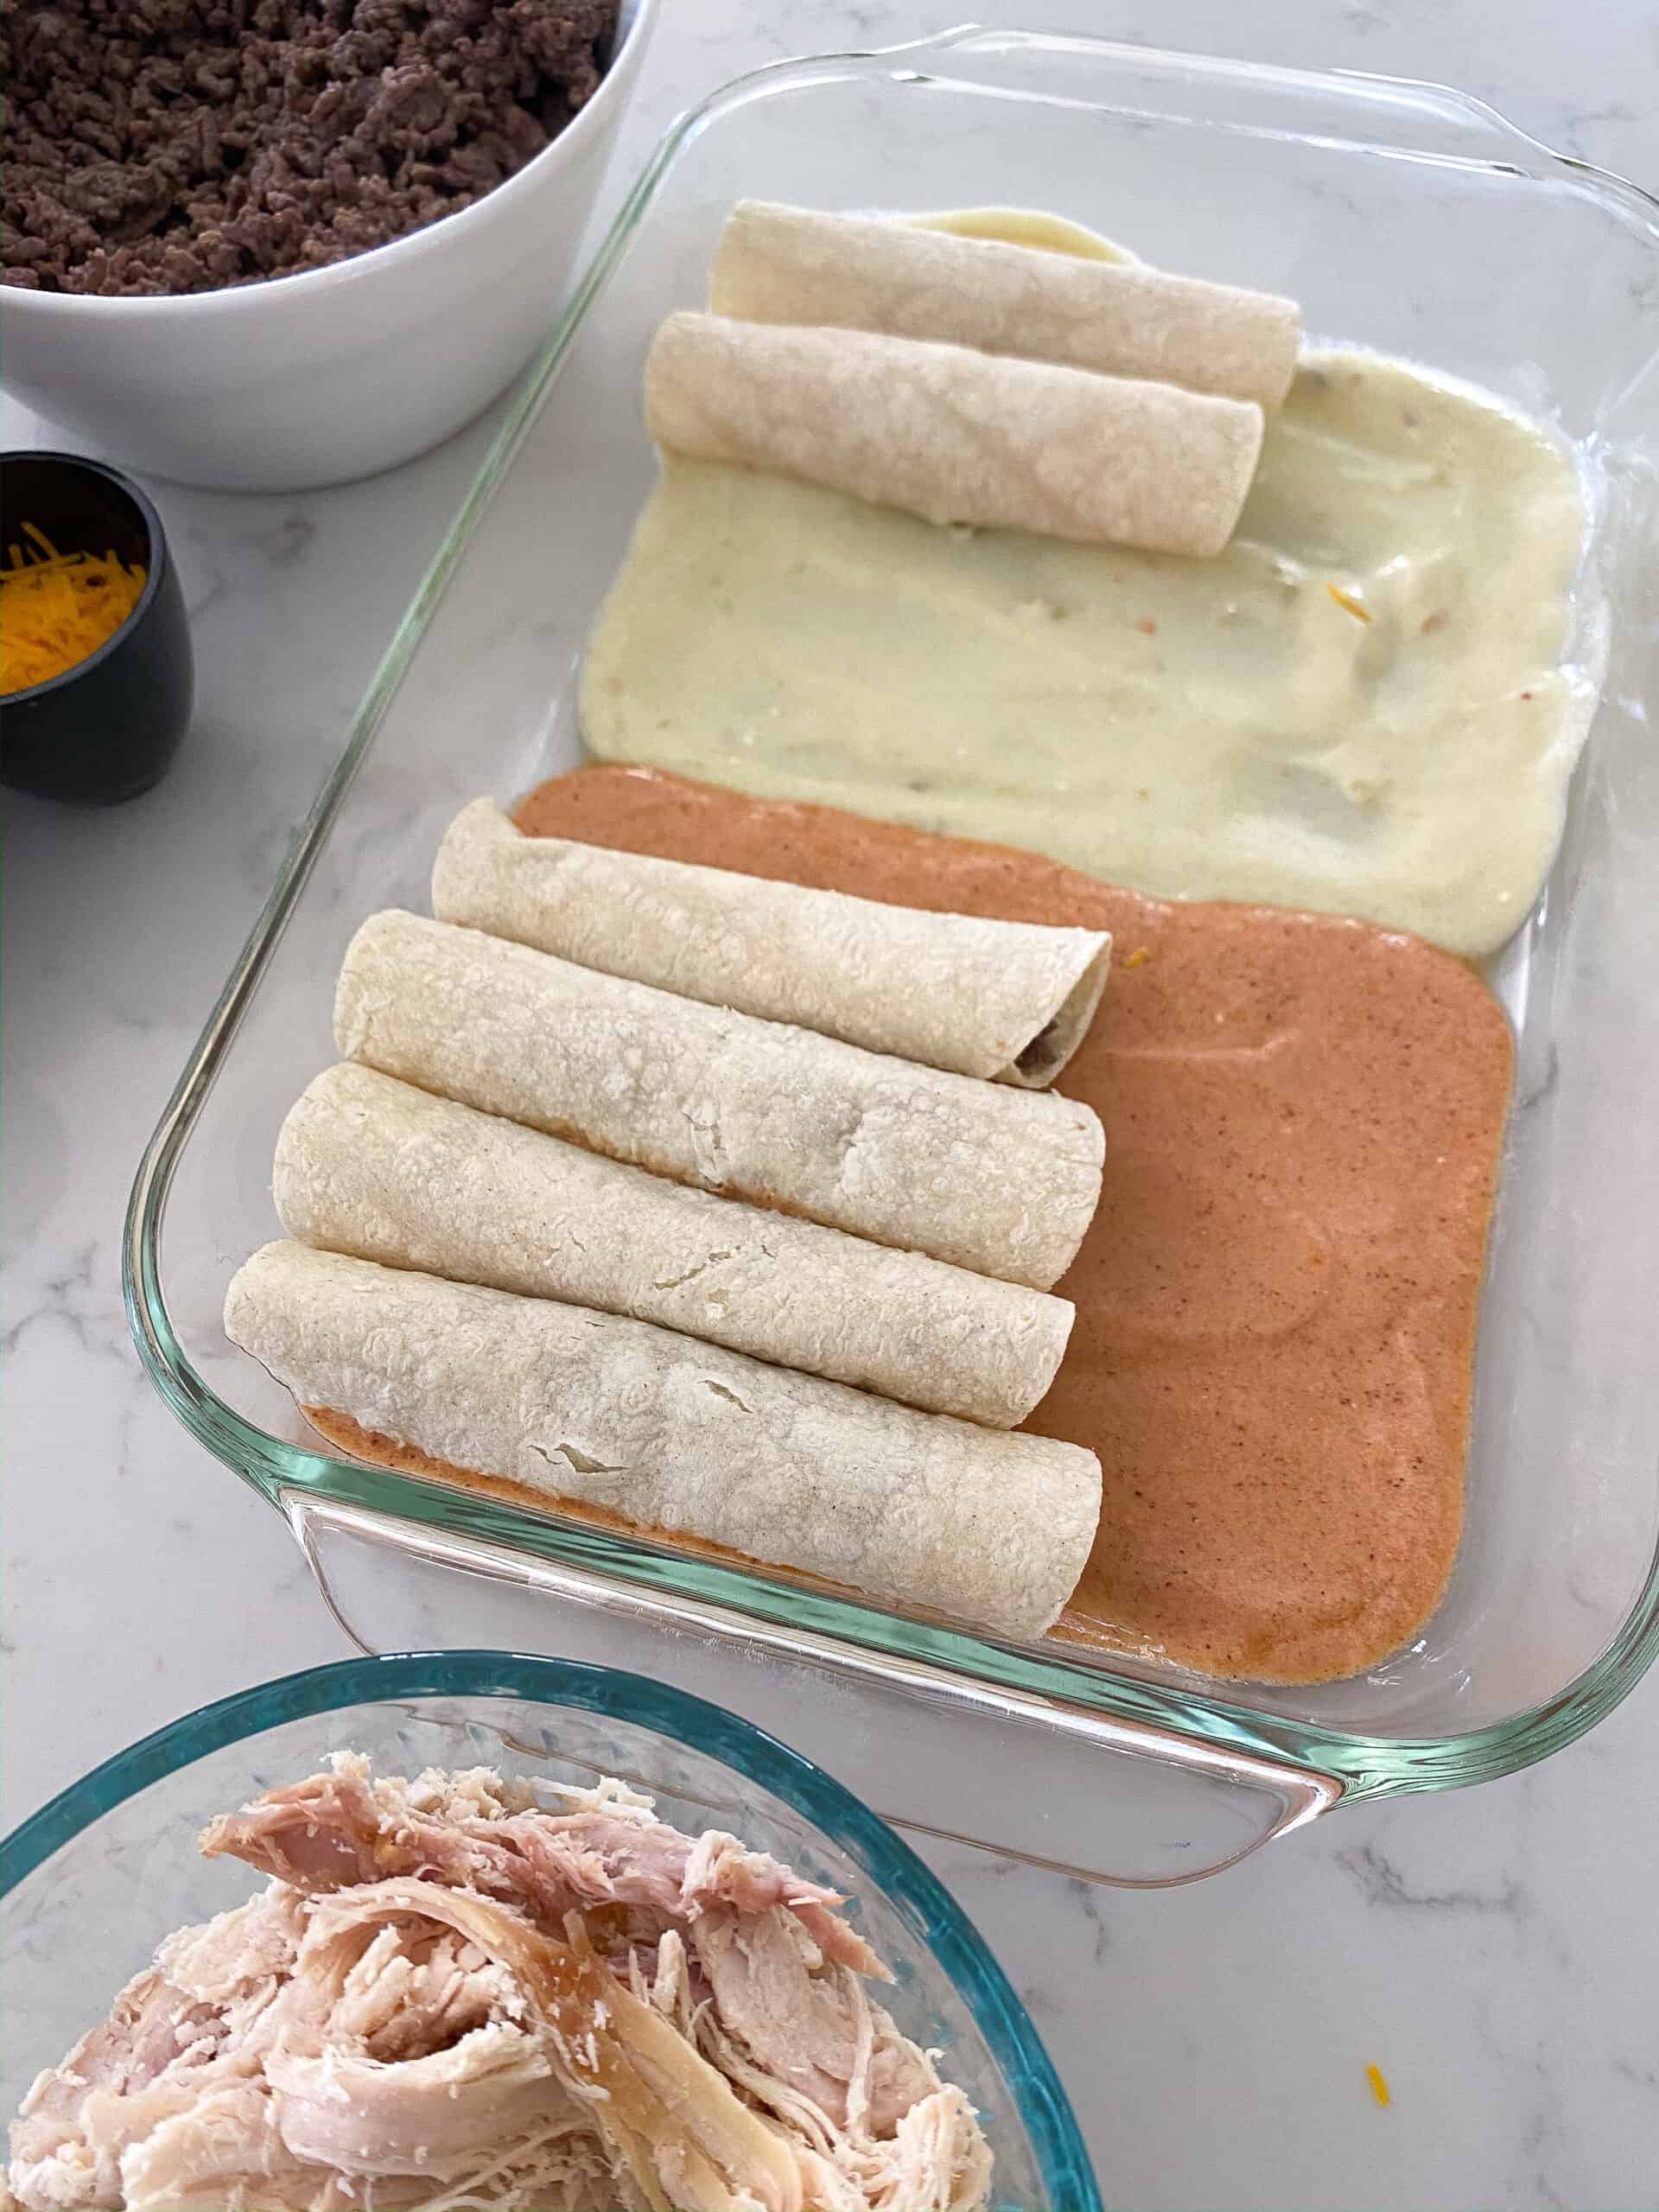 fill baking dish with rolled enchiladas